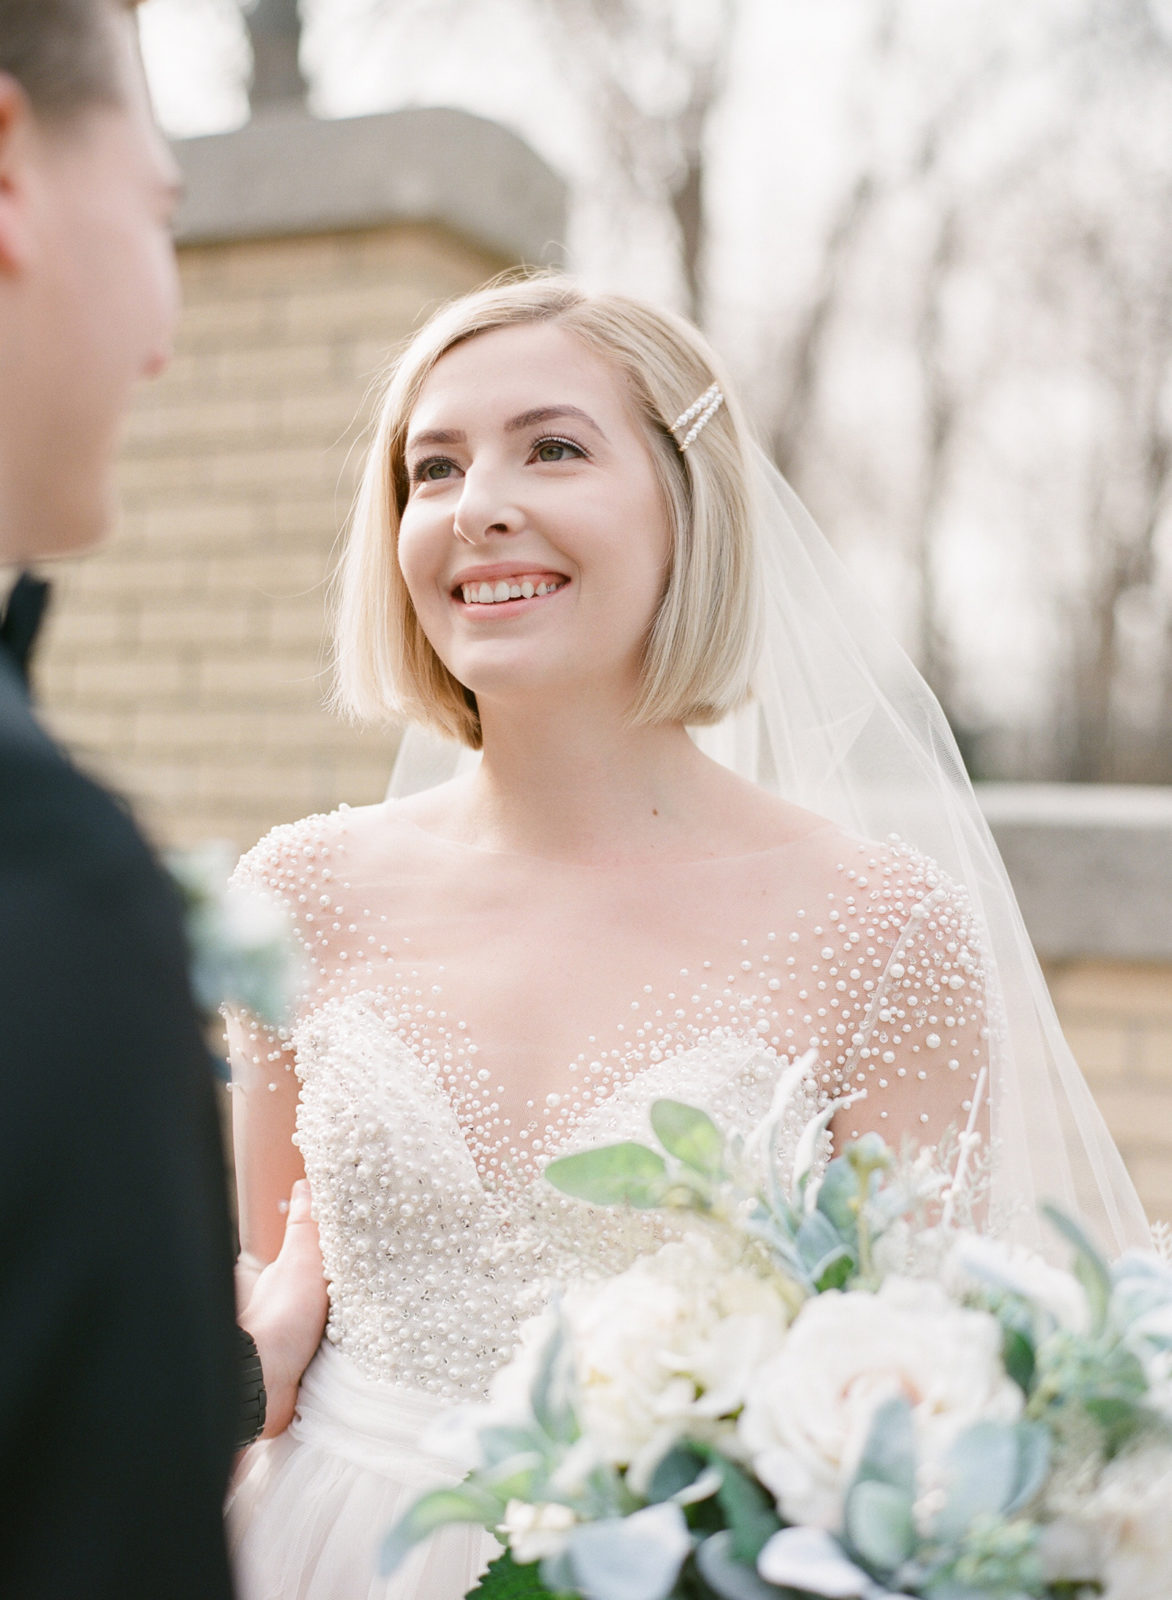 Laurel Hall Wedding Photographer | Estate Wedding Venue | Midwest Film Photographer | Molly Carr Photography | Bride with Blond Bob